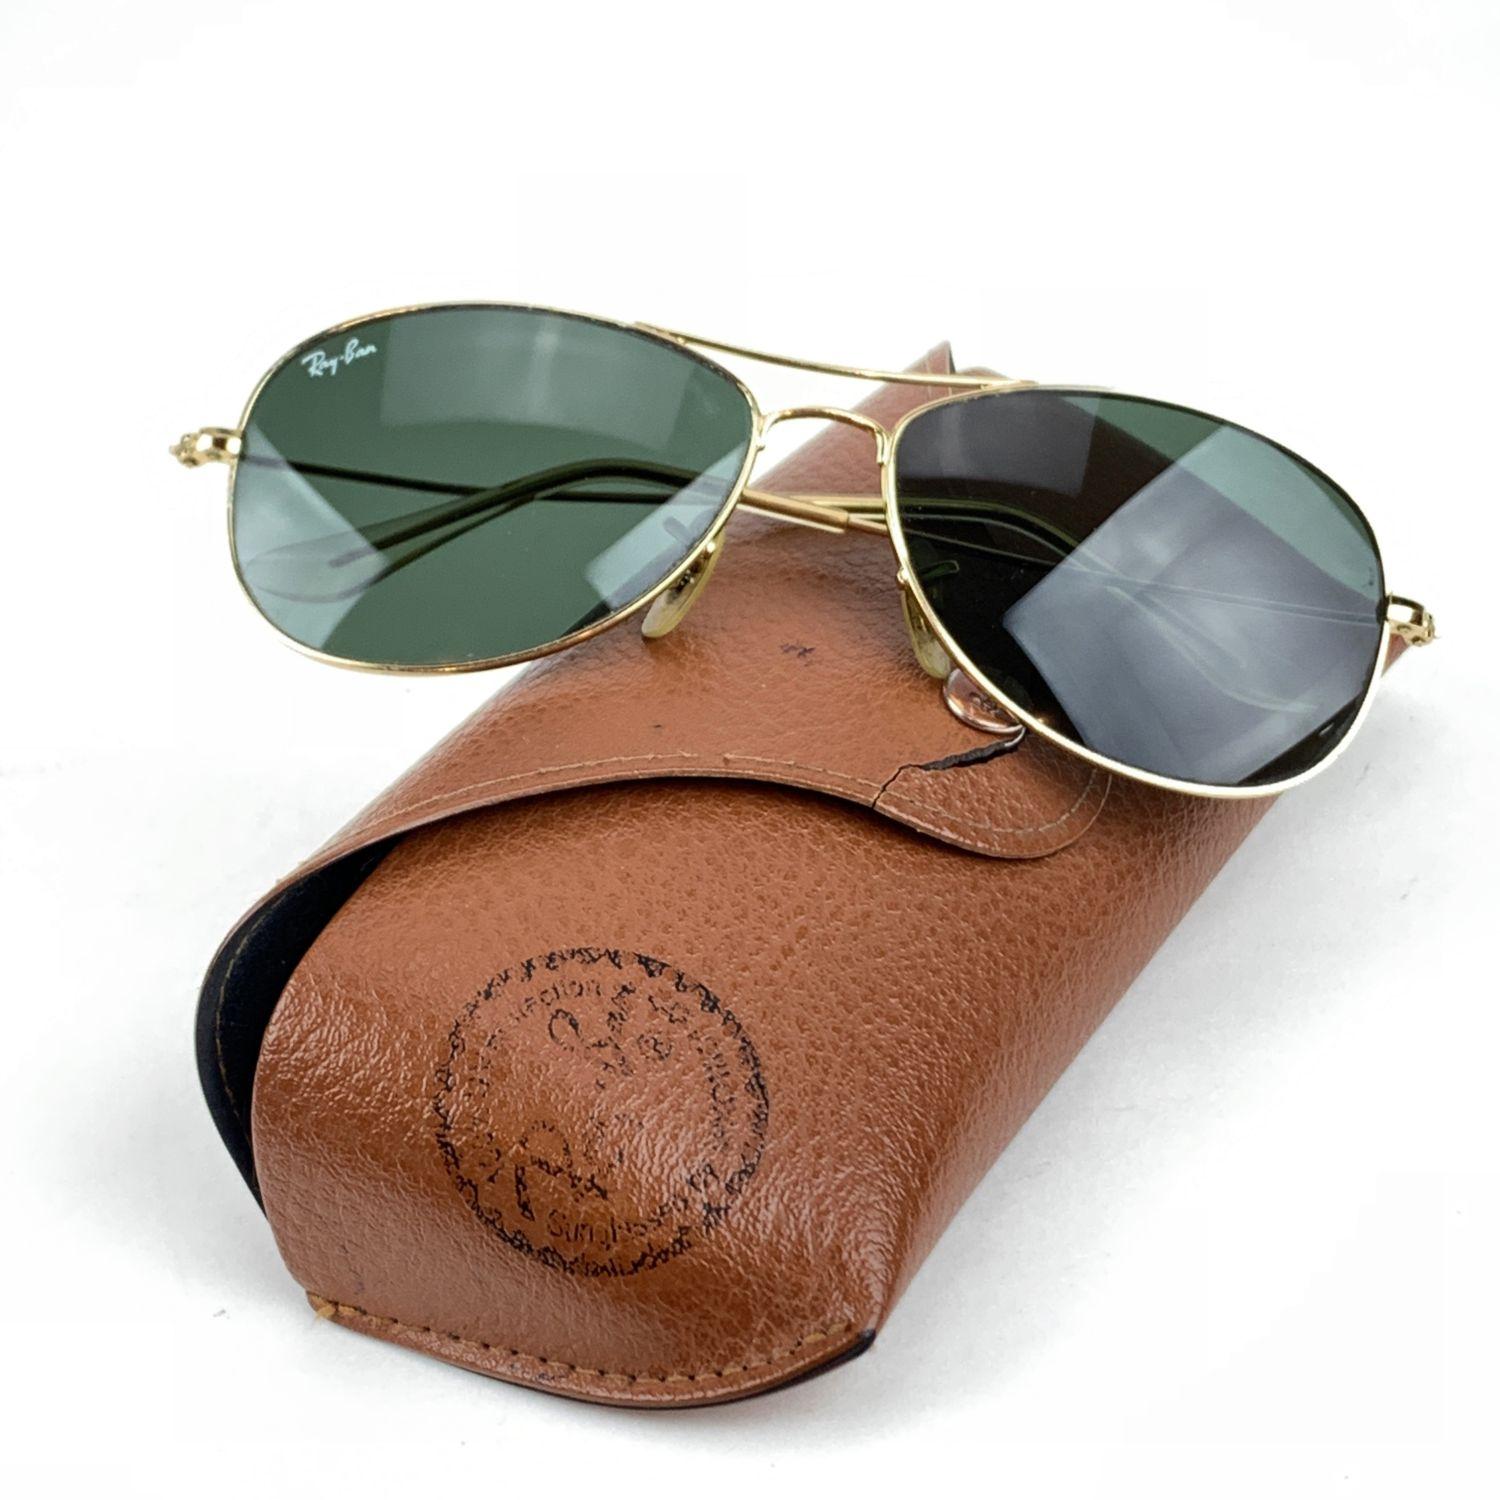 Vintage Ray Ban RB 3362 'Cockpit' sunglasses. Cool variation of traditional aviator glasses . Gold metal frame with original G15 green lenses RB etched on lens. RAY BAN gold logo printed on RIGHT lens. Style & refs: RB 3362 - Cockpit - 56/18 -